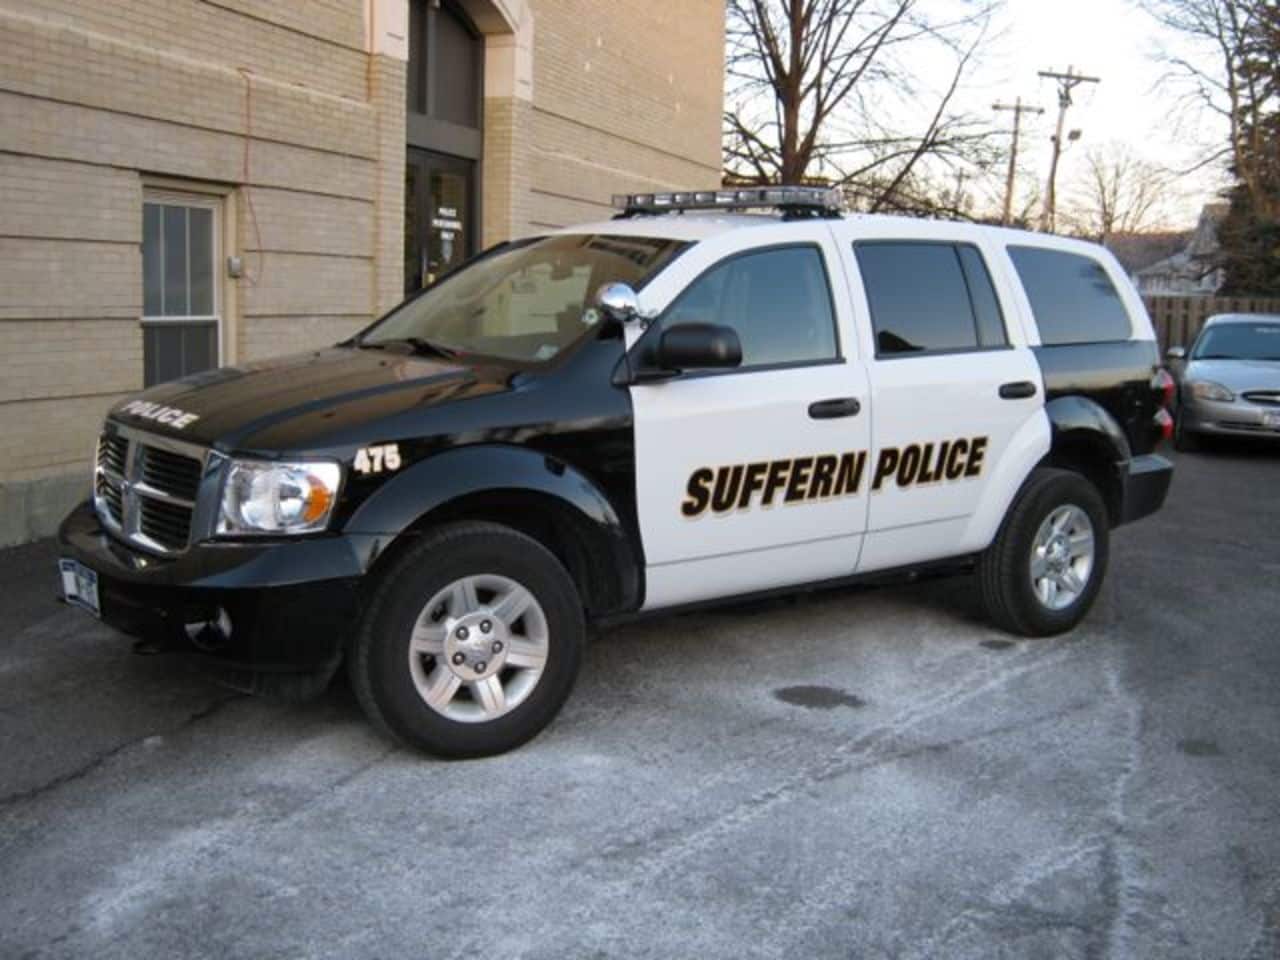 Suffern police are still investigating an accident that injured a woman Wednesday night.